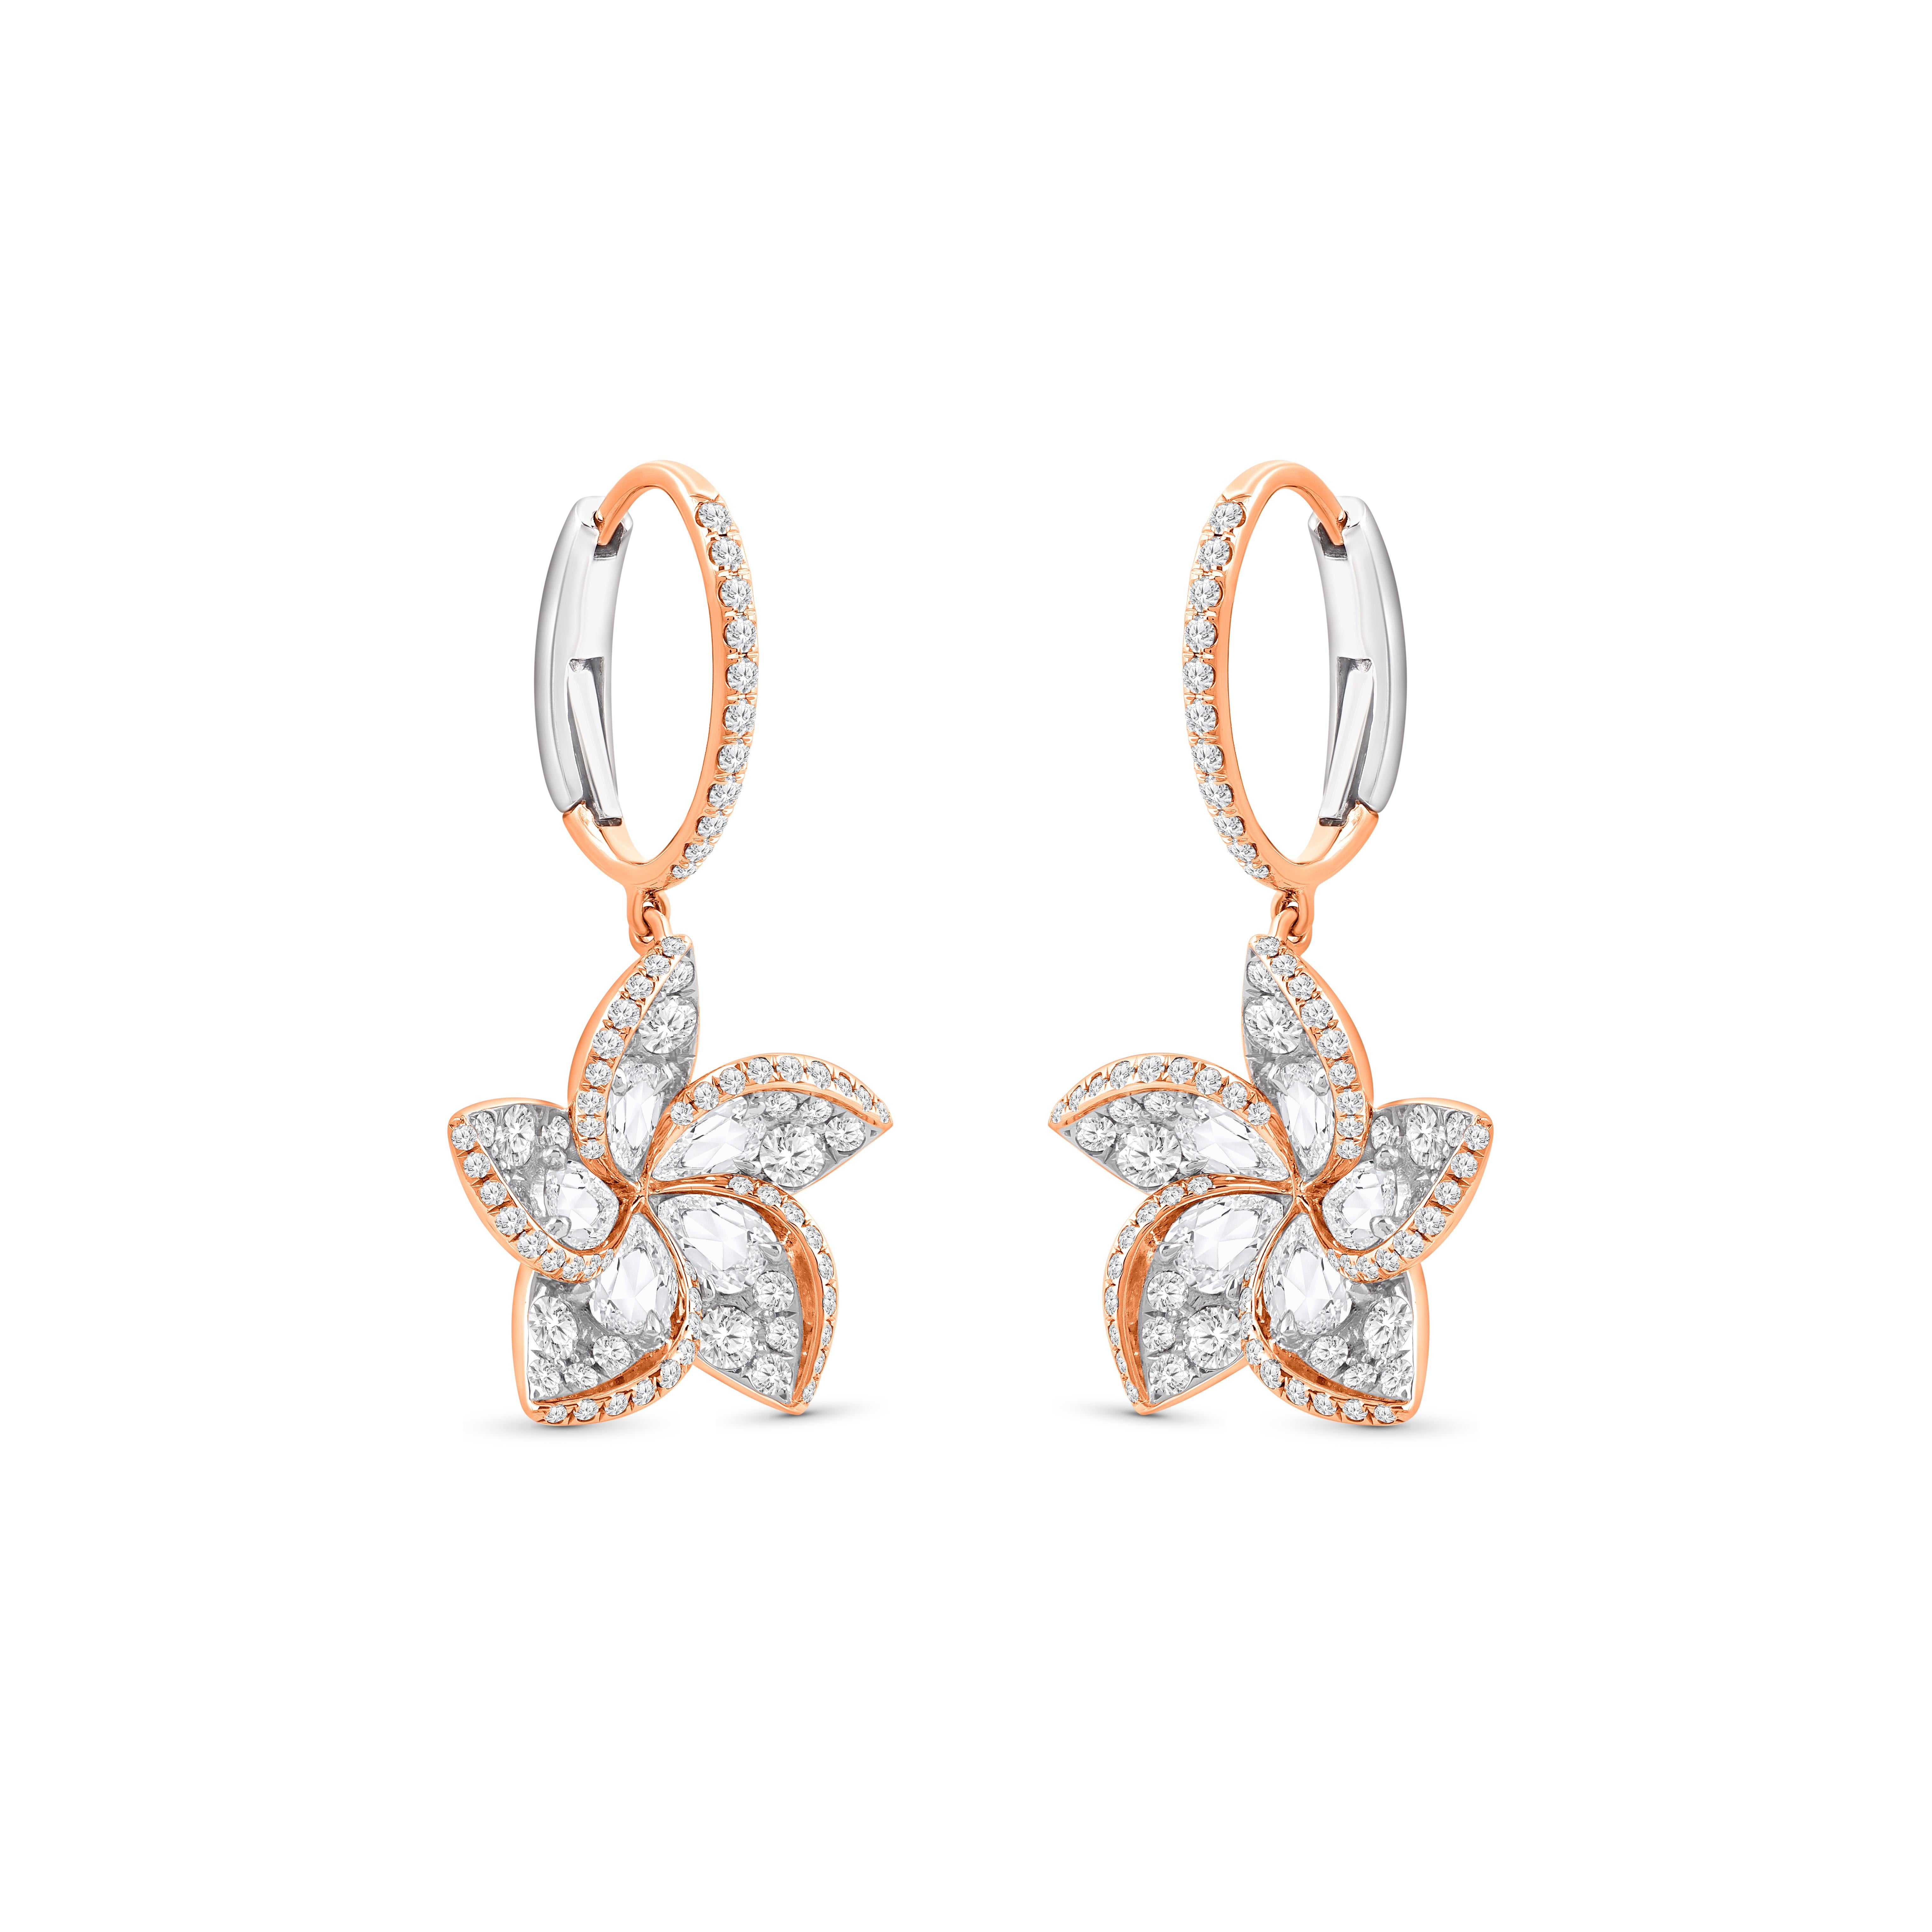 A brilliant cluster of diamonds comes together in these beautiful dangle earrings. There are 10 rose-cut pear diamonds and 162 brilliant round-cut diamonds set into these earrings. The diamonds are graded as F color and VS2 clarity. The total